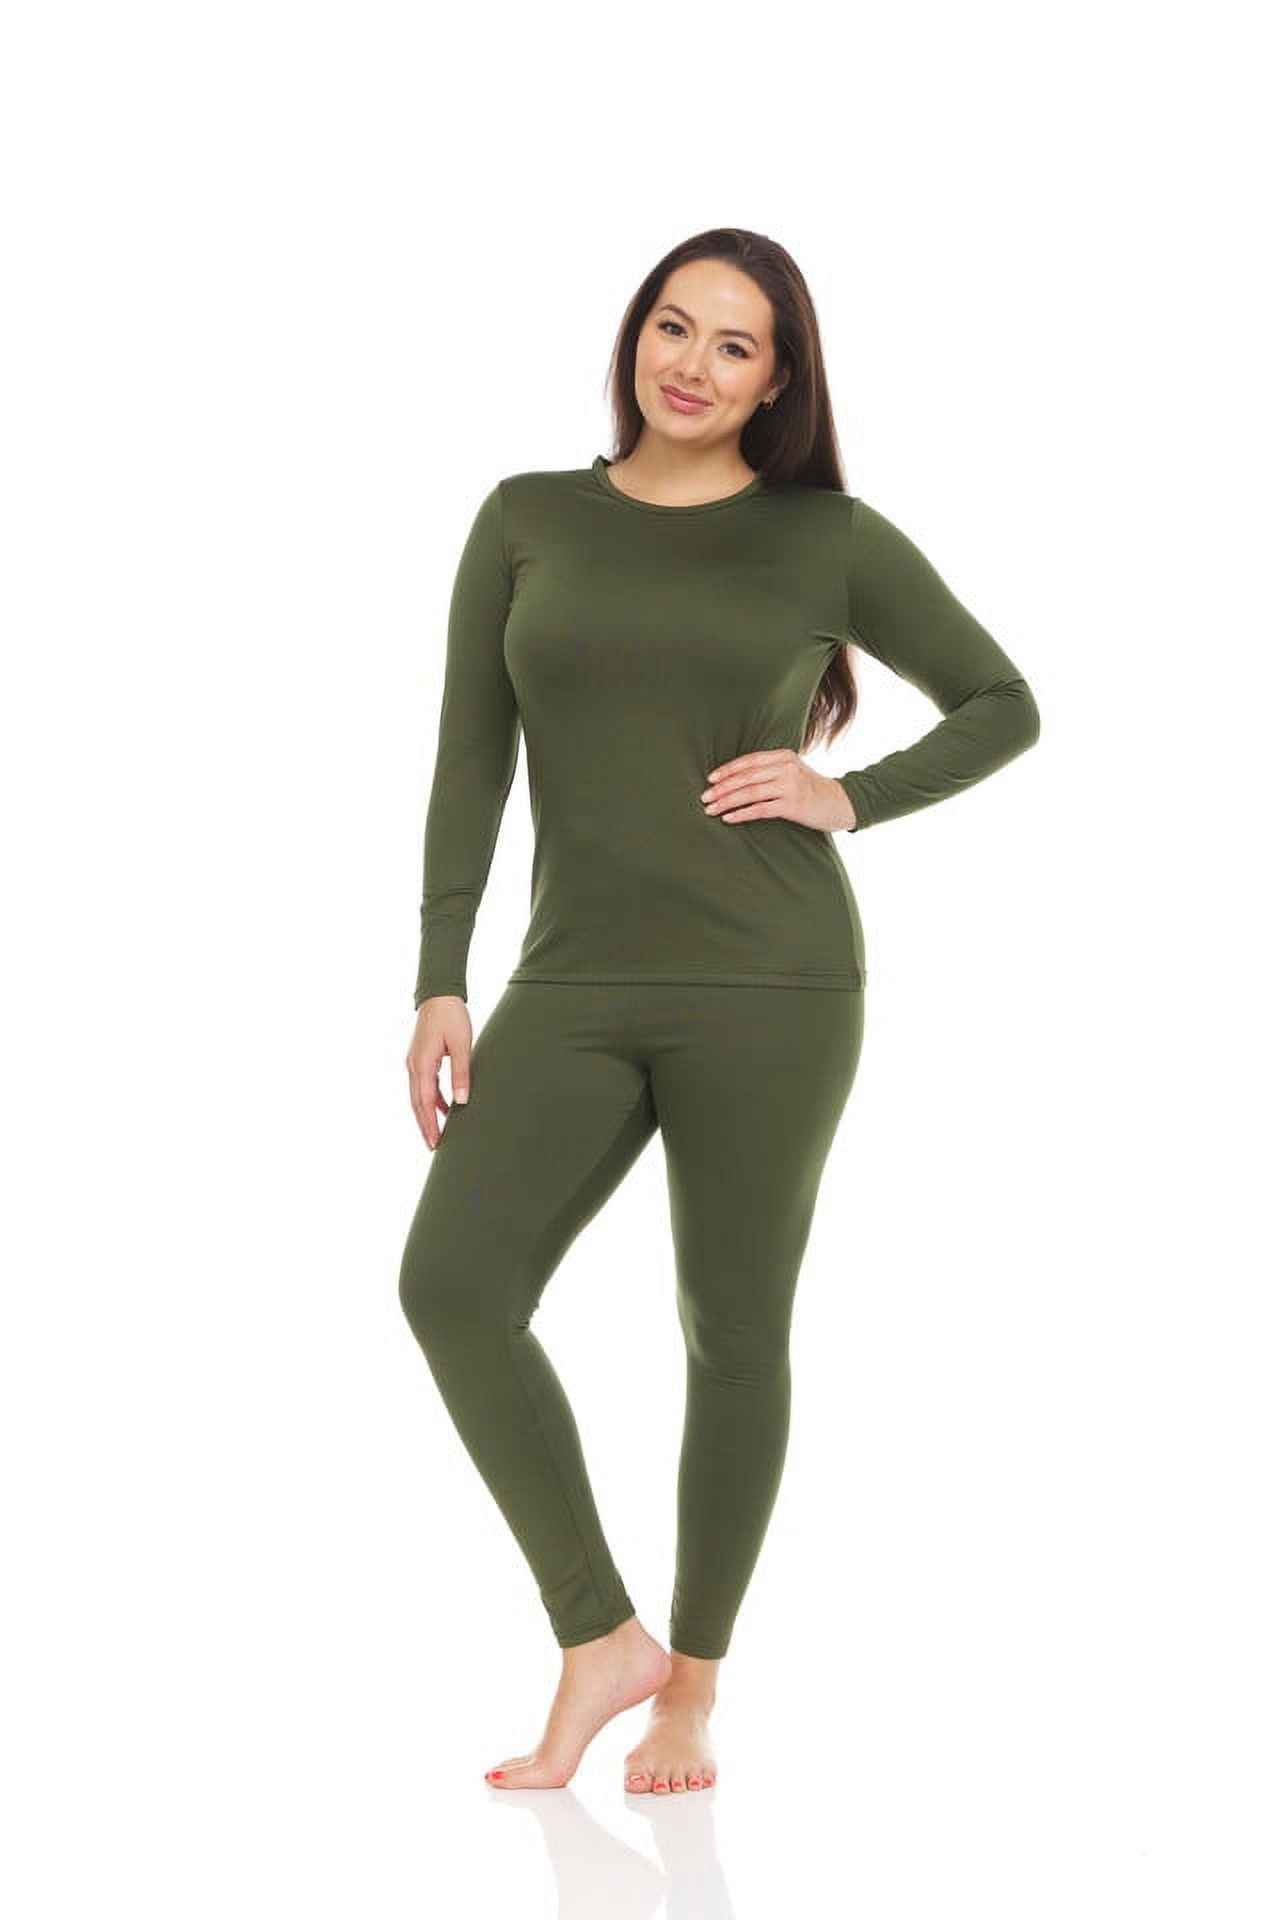 Women's Ultra Soft Thermal Underwear Set by Thermajane